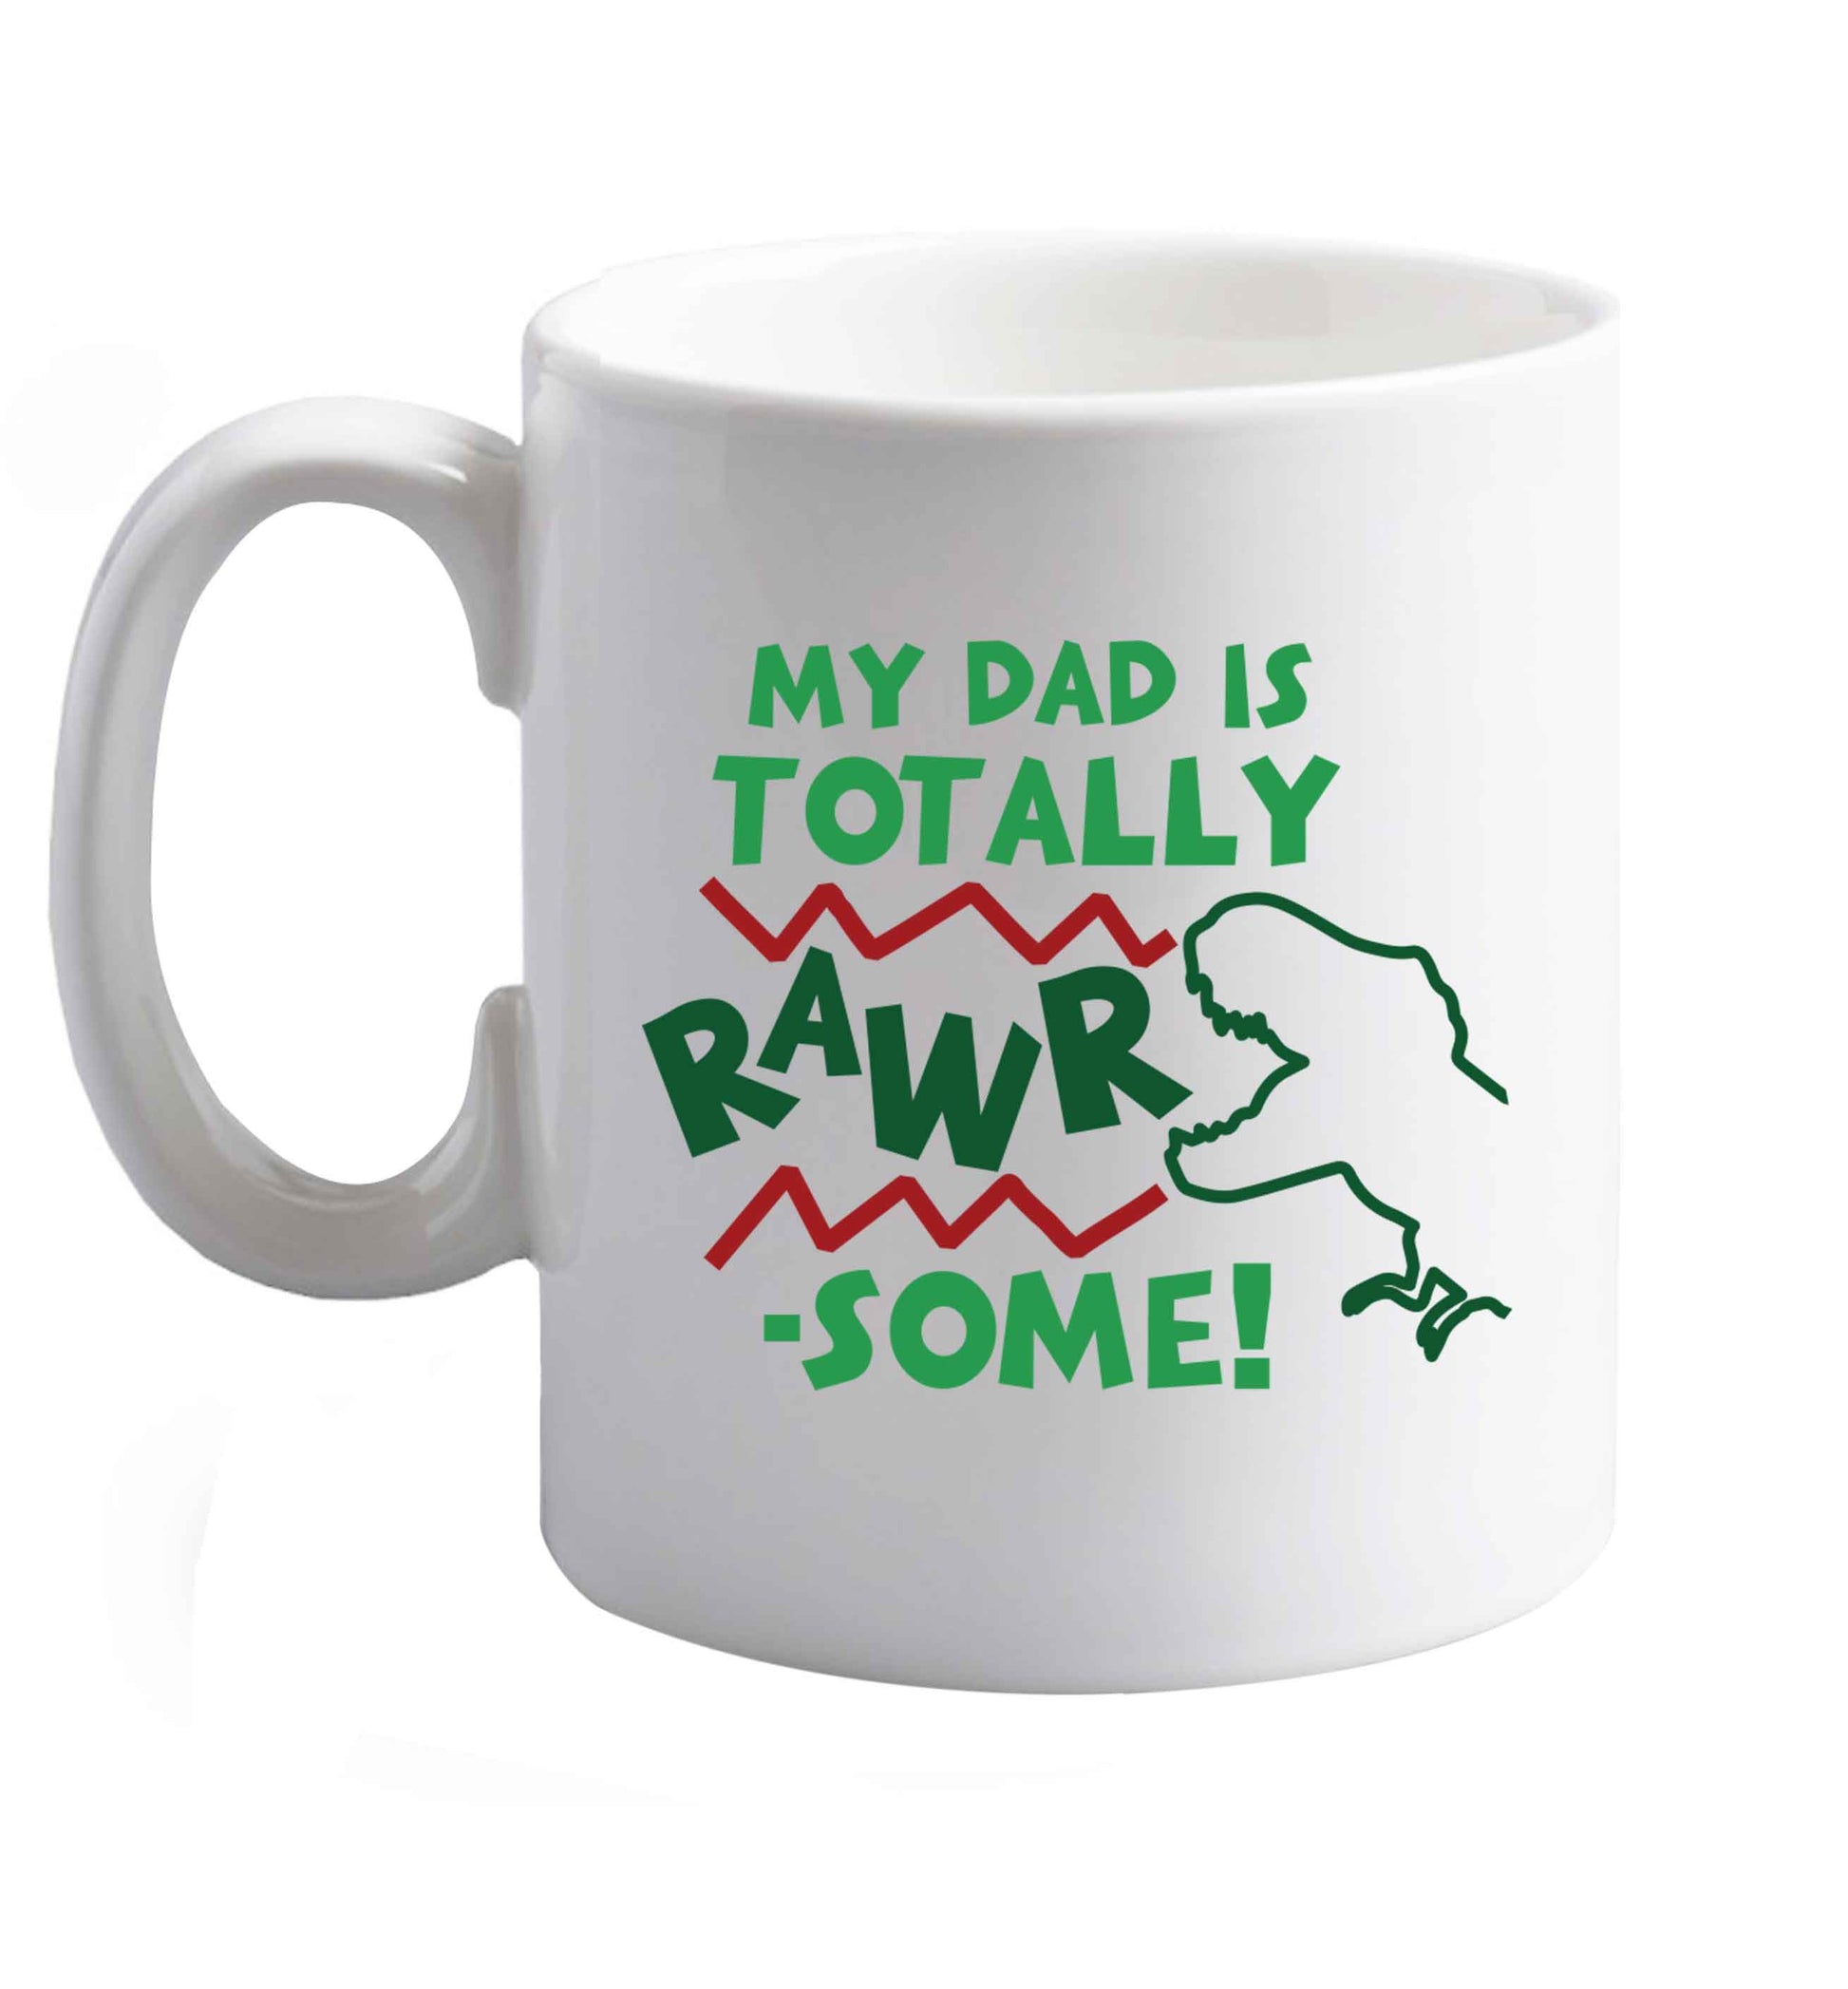 10 oz My dad is totally rawrsome ceramic mug right handed